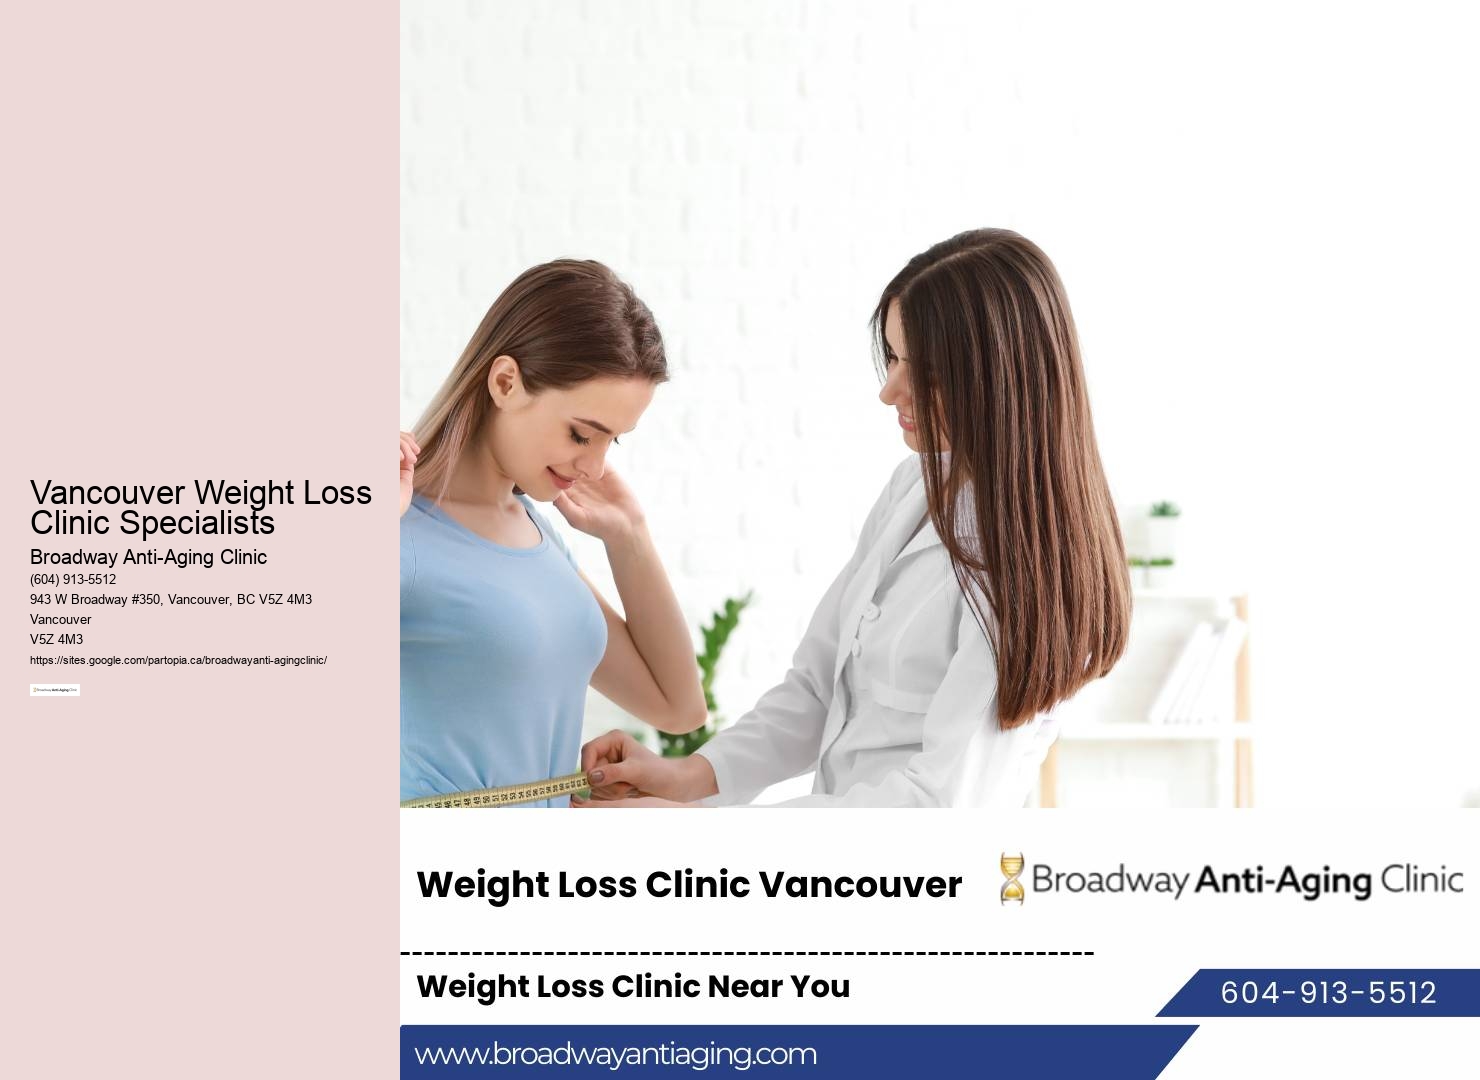 Vancouver Weight Loss Clinic Specialists